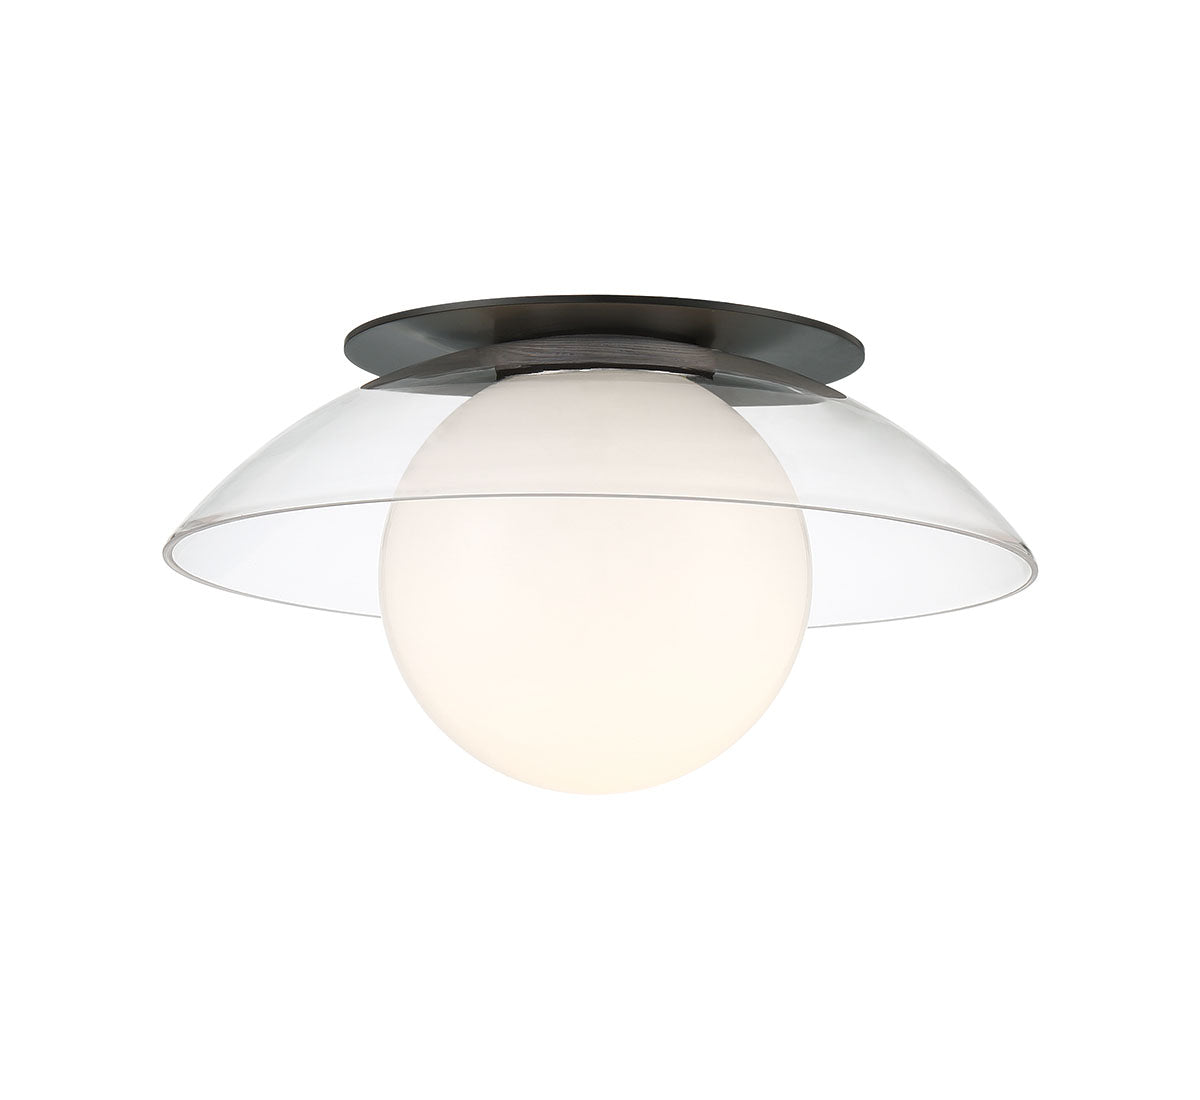 ANCONA 10125-01, Small 1 Light Ceiling/Wall Mount